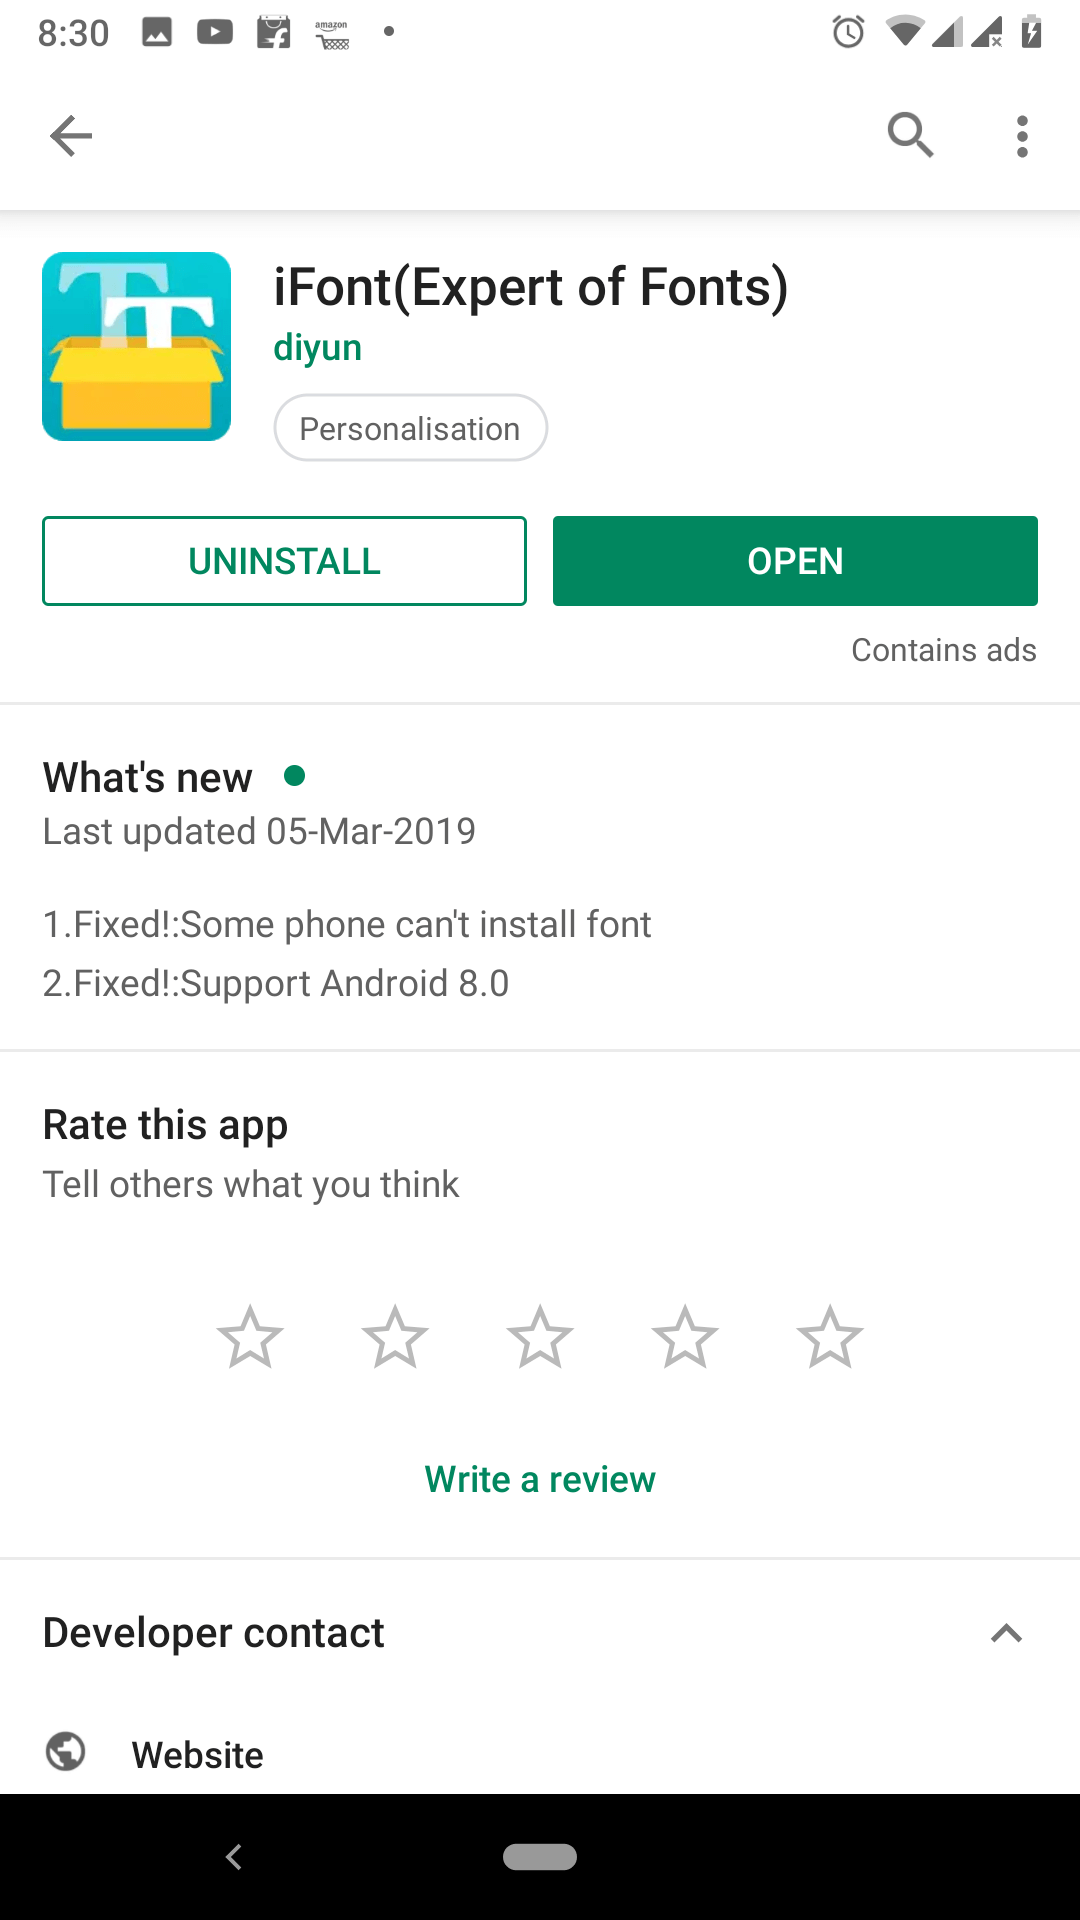 change fonts on android